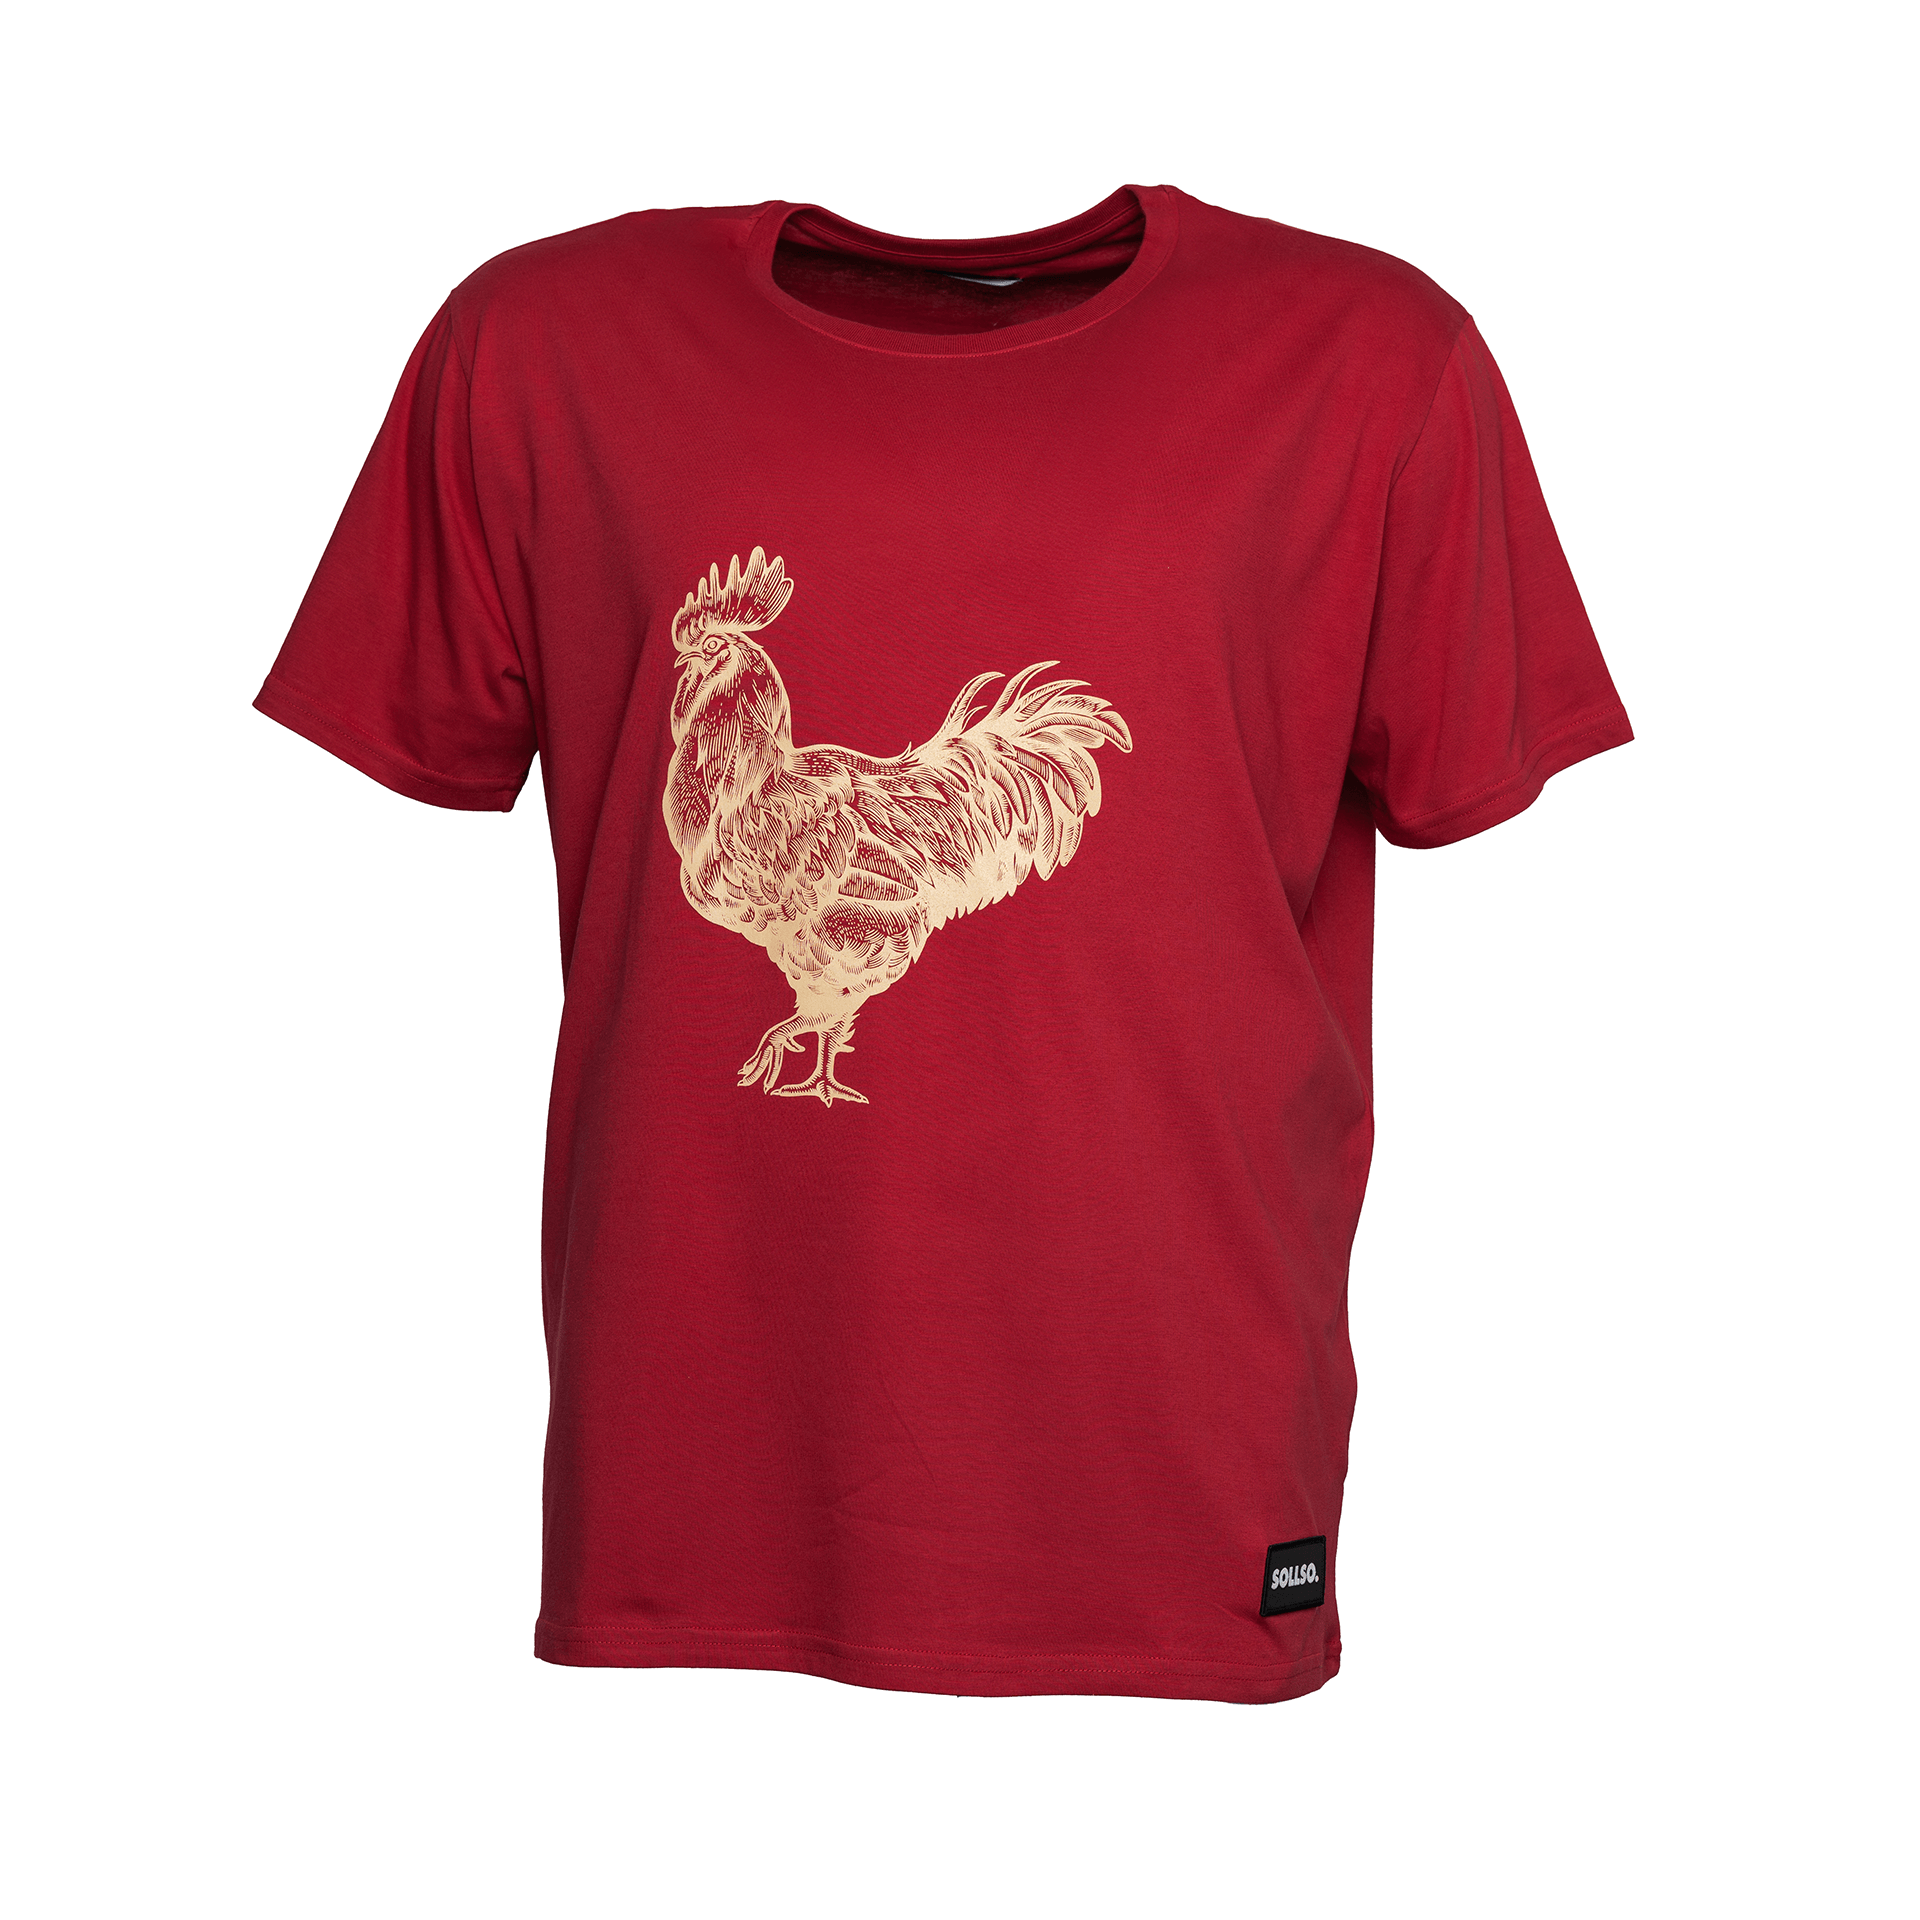 SOLLSO. T-Shirt "Rooster", Farbe Ginger Red, Größe S